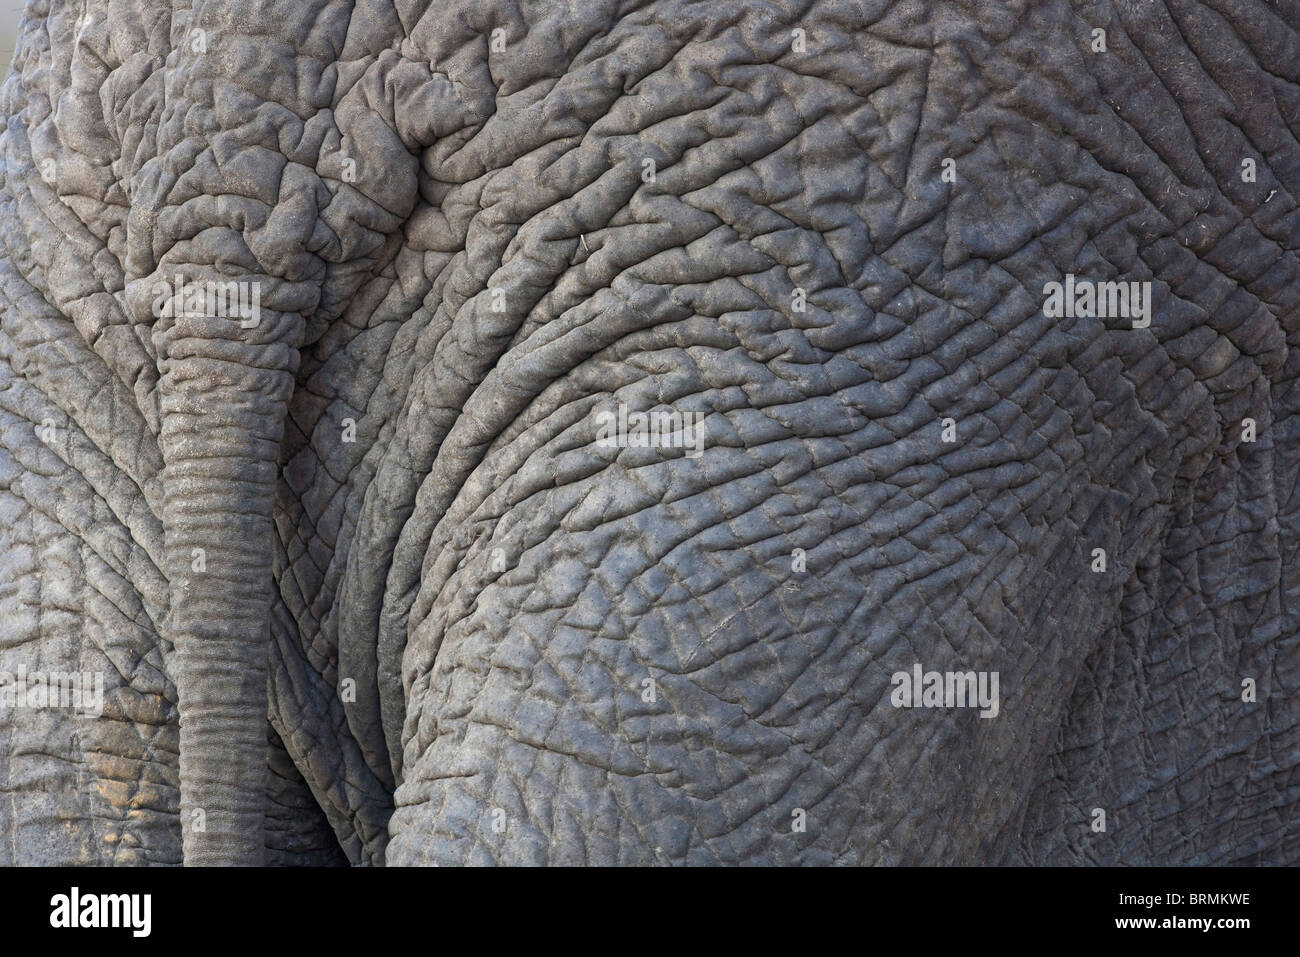 Close-up photo of the rear of an elephant showing the base of the tail Stock Photo